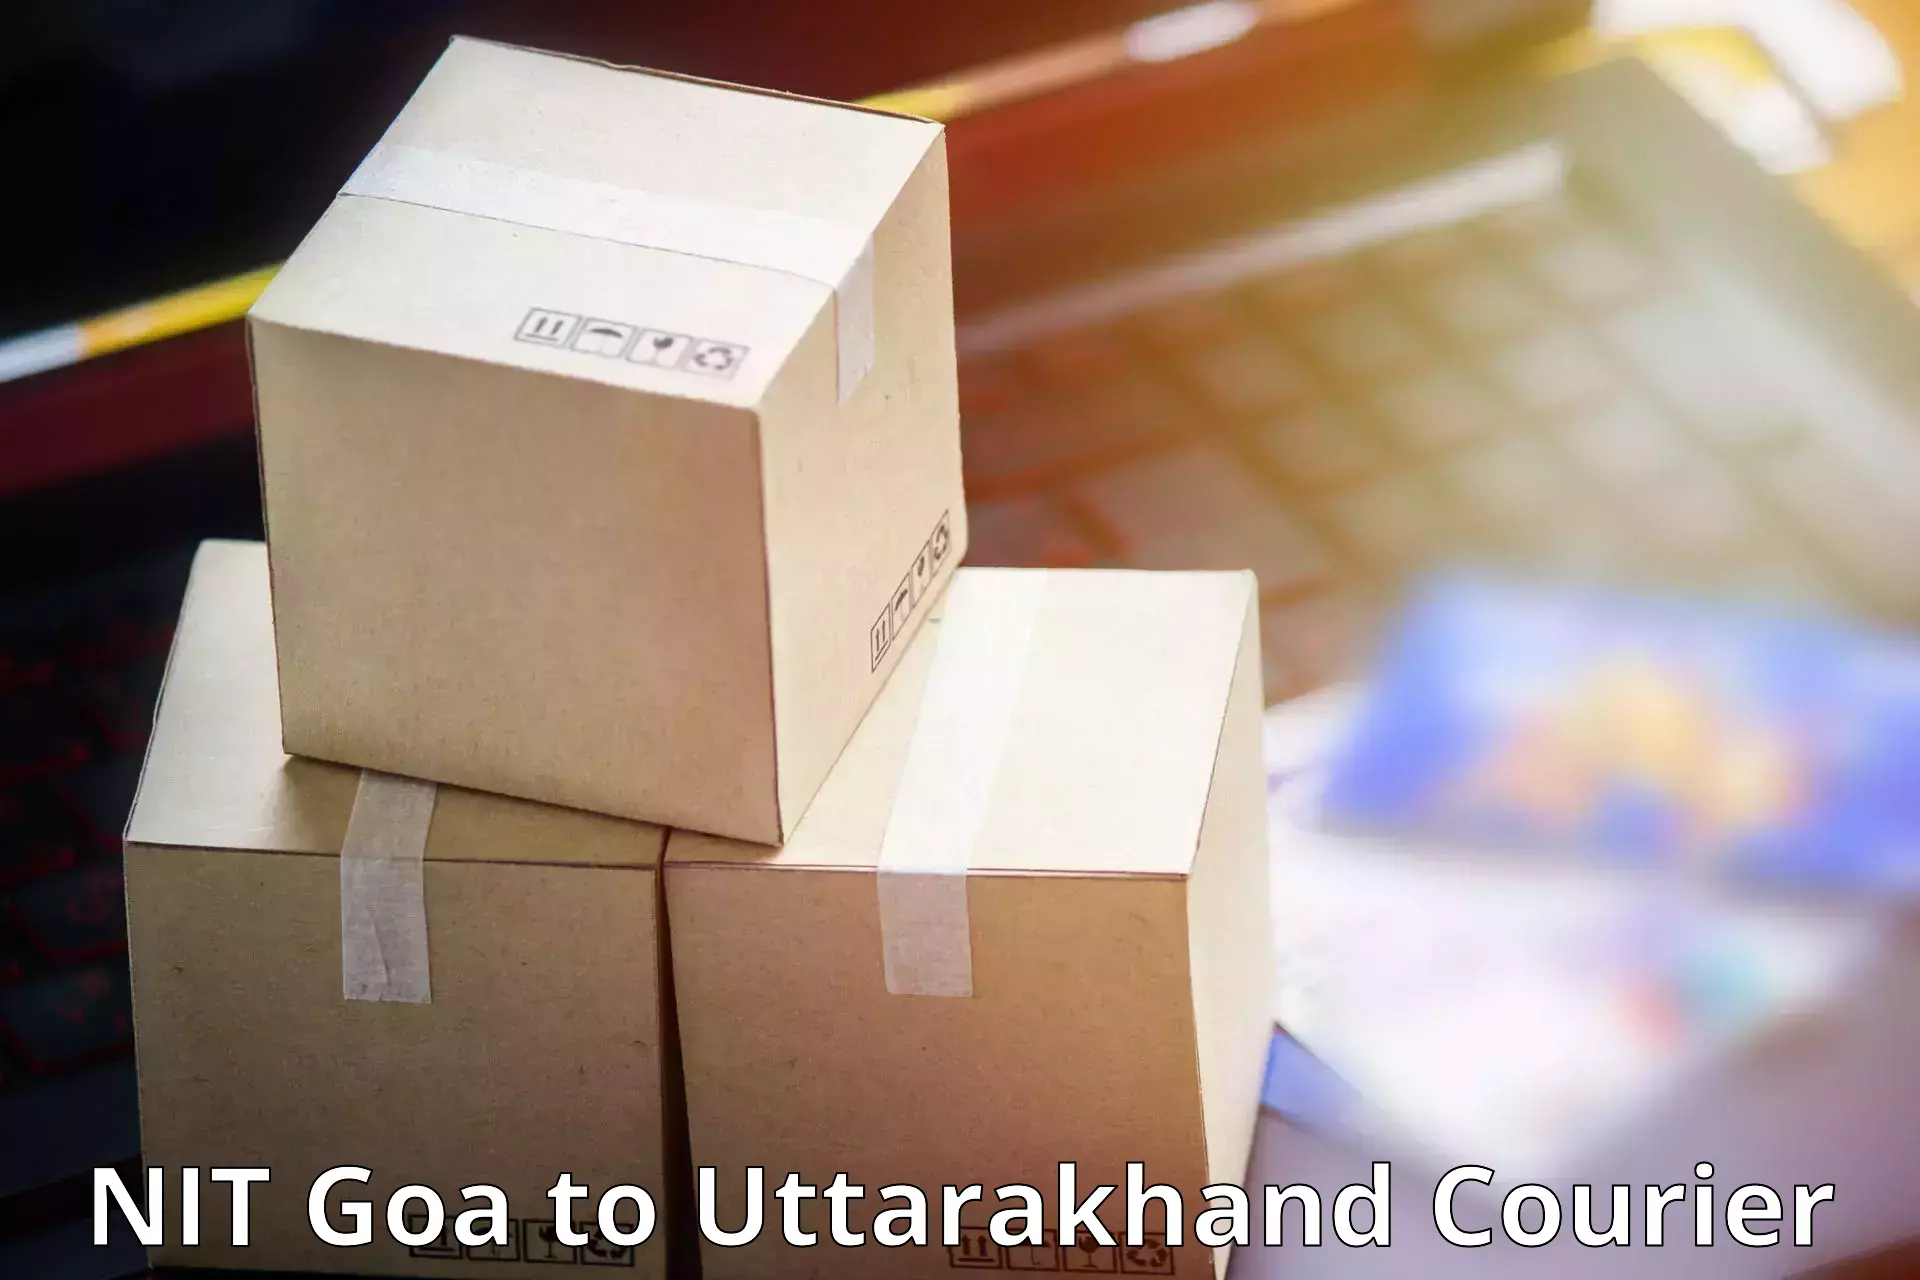 State-of-the-art courier technology NIT Goa to Rudraprayag